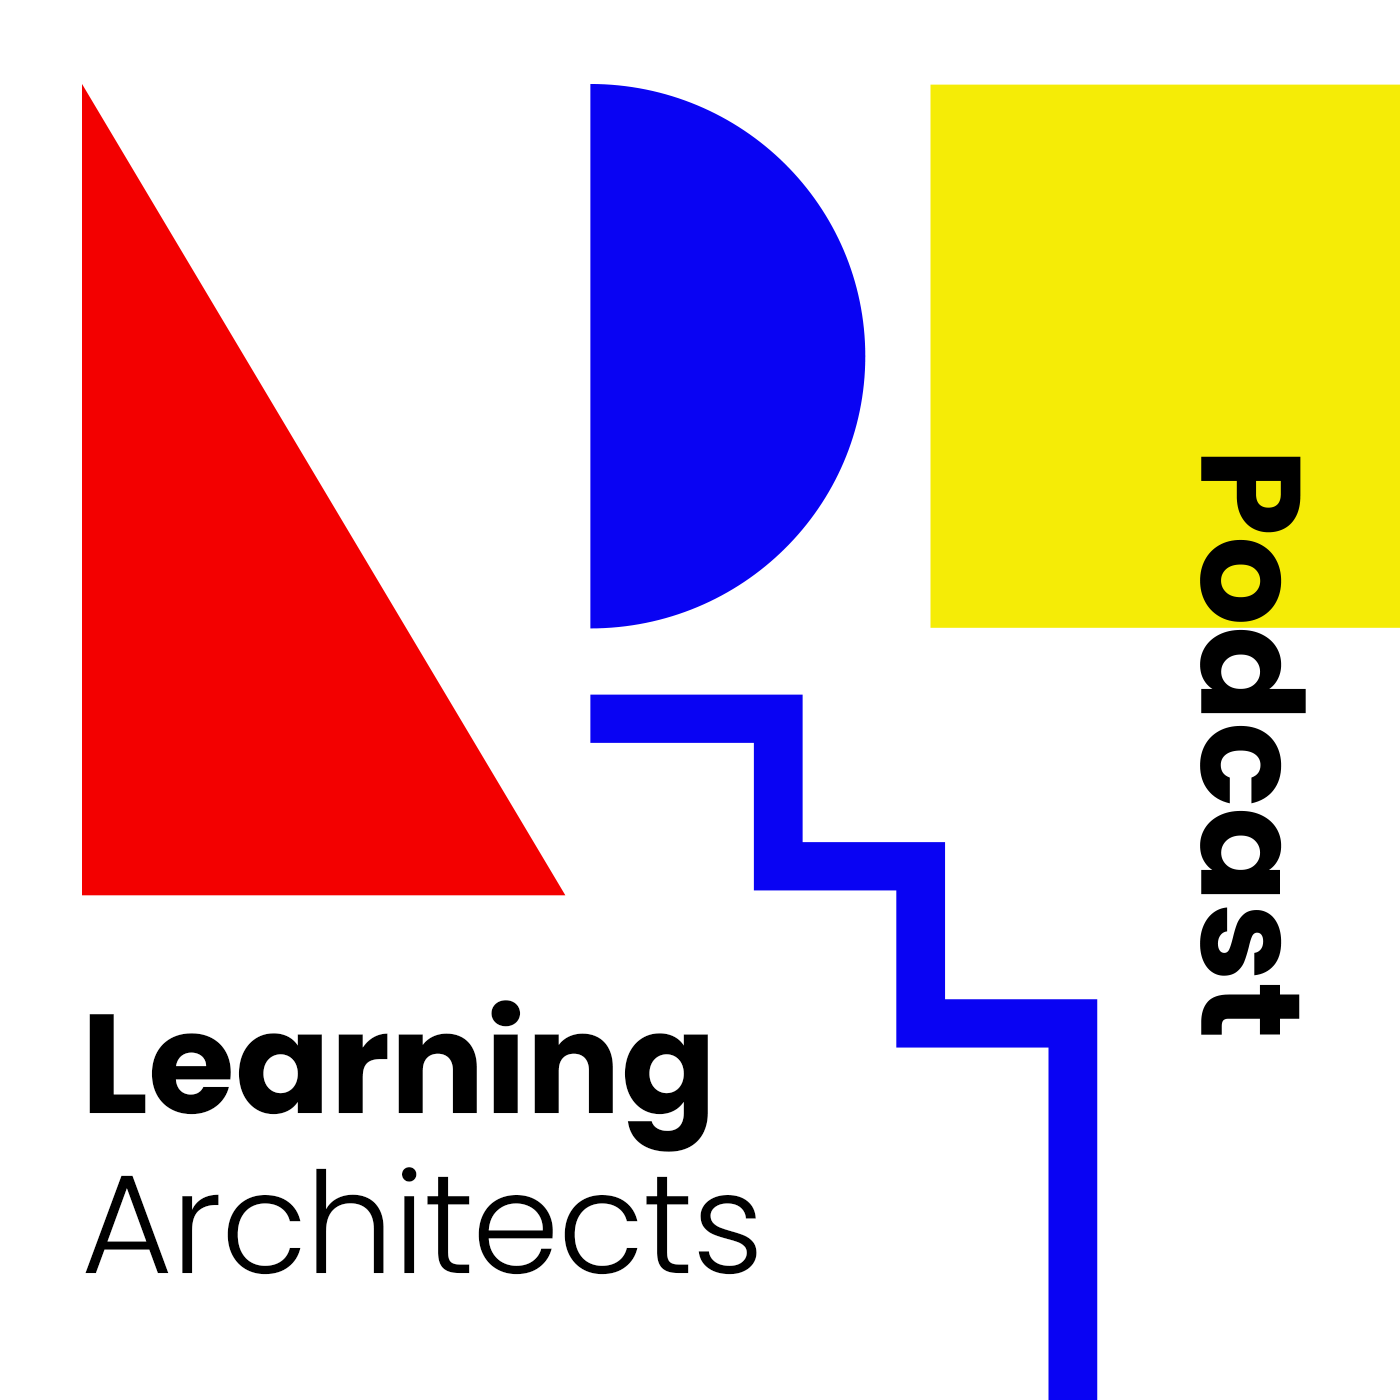 Learning Architects